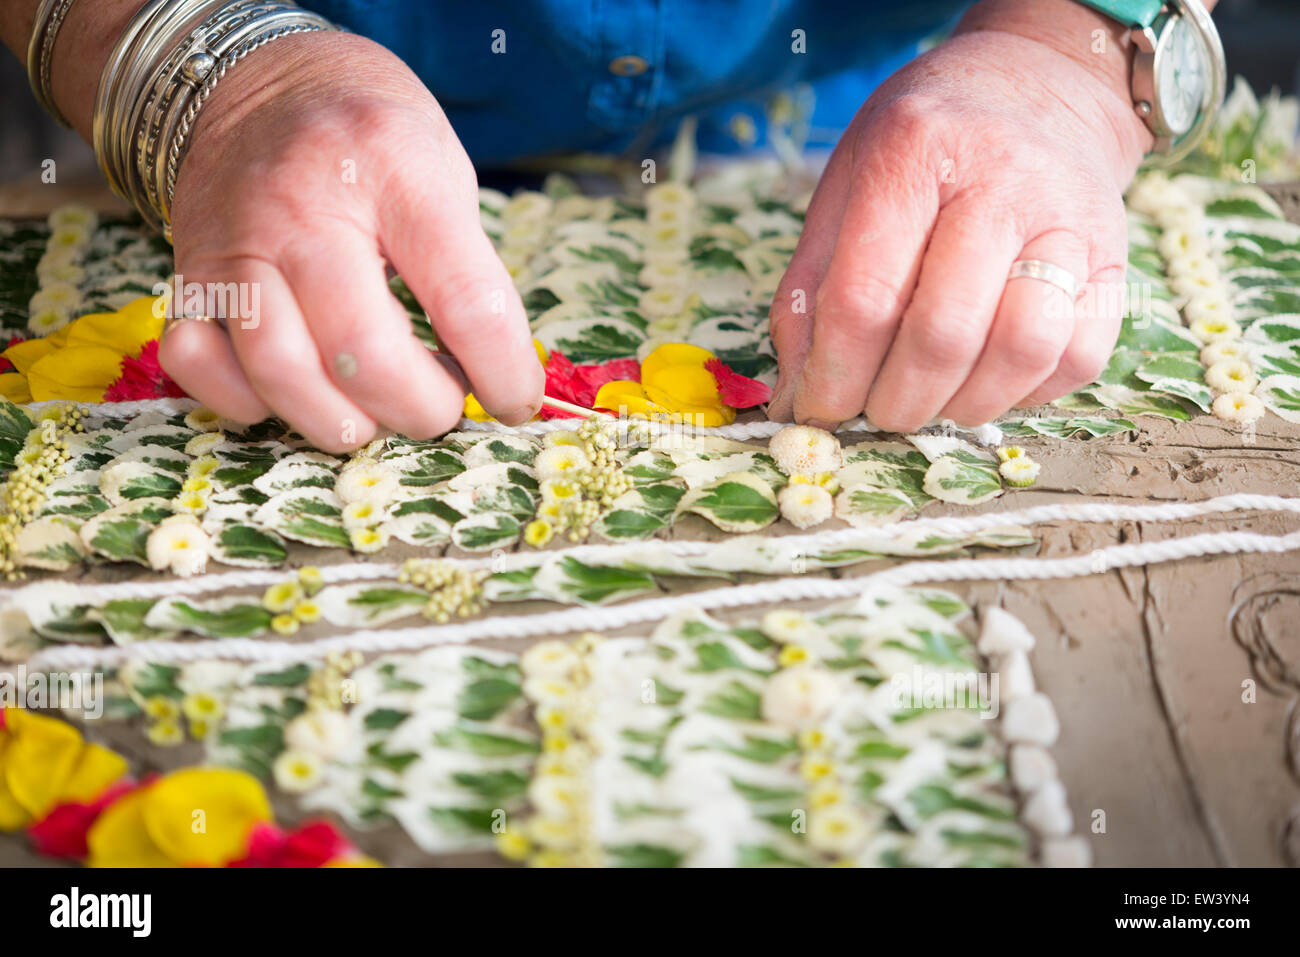 Holywell, UK. 17th June, 2015. Jill Harvey decorates a wooden frame with thousands of individual flower petals and seeds to form an intricate mosaic picture that is displayed by the ancient well at the Church of St John the Baptist in the riverside village of Holywell, Cambridgeshire UK. The painstaking task is carried out by a team of local volunteers and starts with the design being pricked out in the clay, followed by the placing of individual petals pressed into the clay with a cocktail stick. Credit:  Julian Eales/Alamy Live News Stock Photo